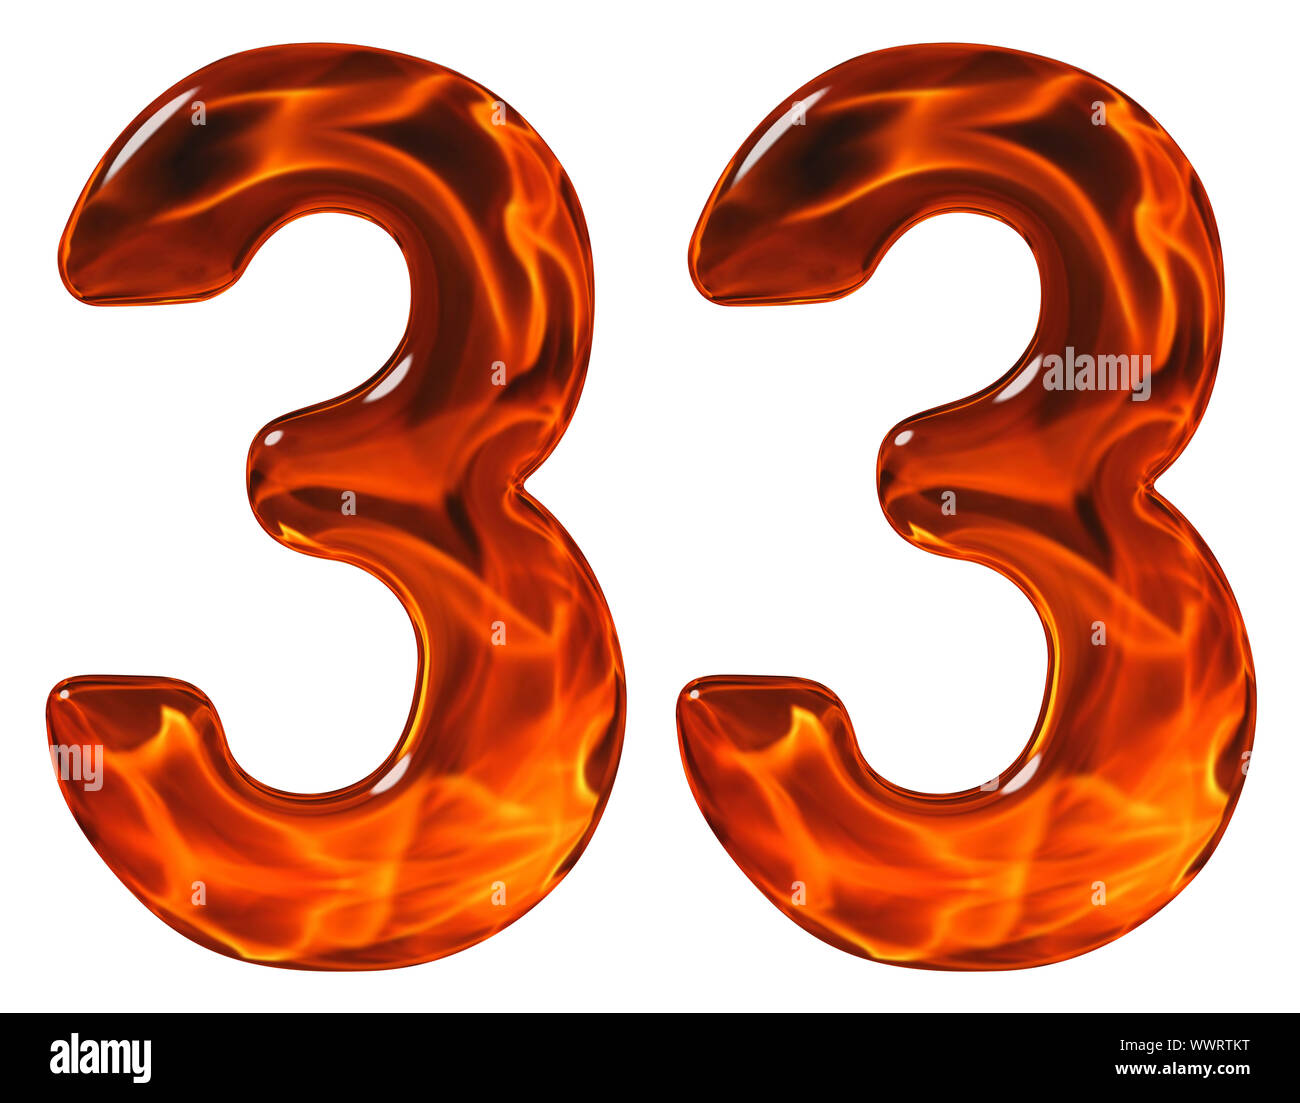 33, thirty three, numeral, imitation glass and a blazing fire